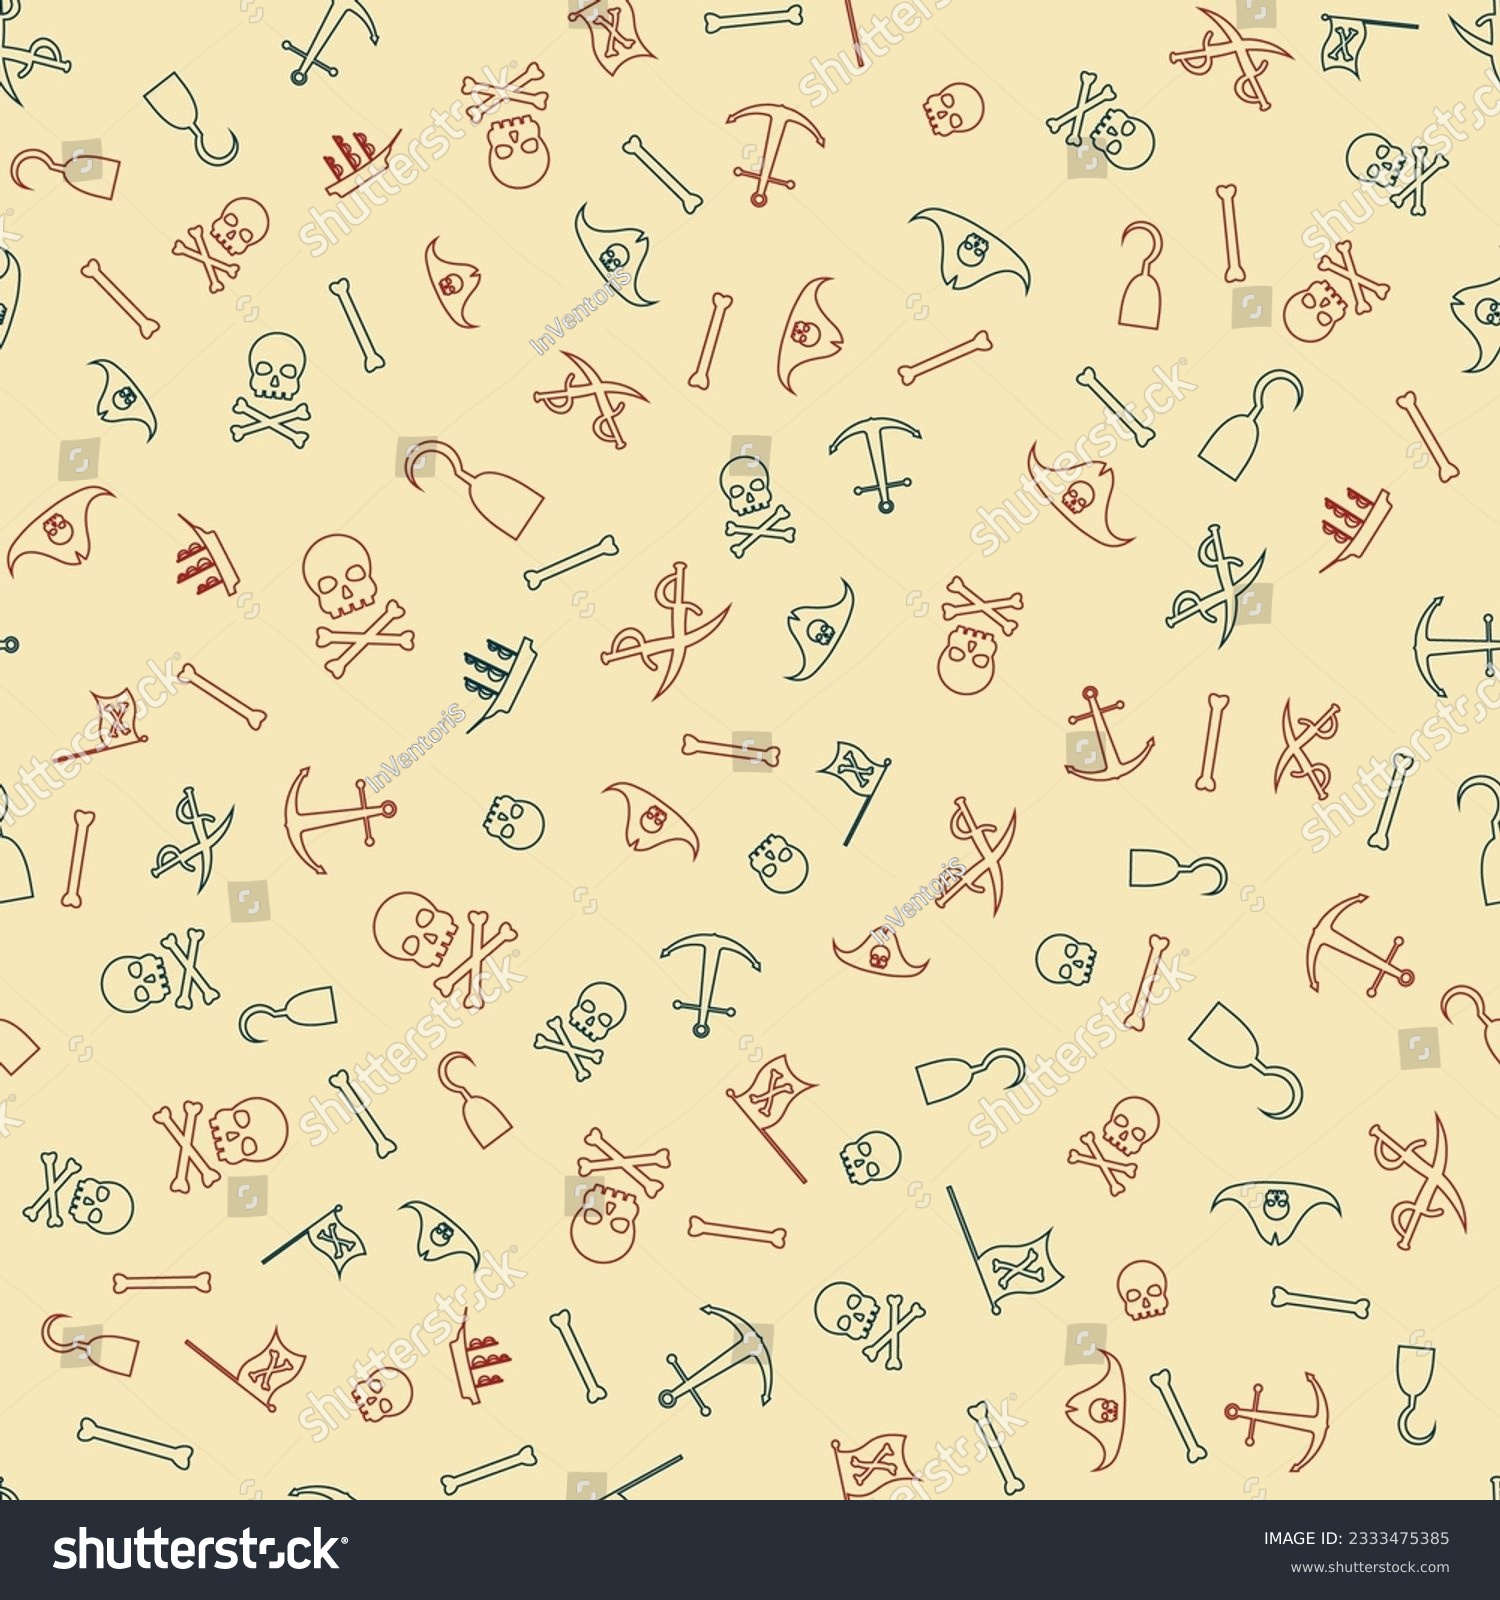 SVG of Vector abstract seamless pattern with skull, crossbones, pirate flag, swords and other nautical symbols. Vintage background with hand-drawn sketches, ink blots and stains. svg